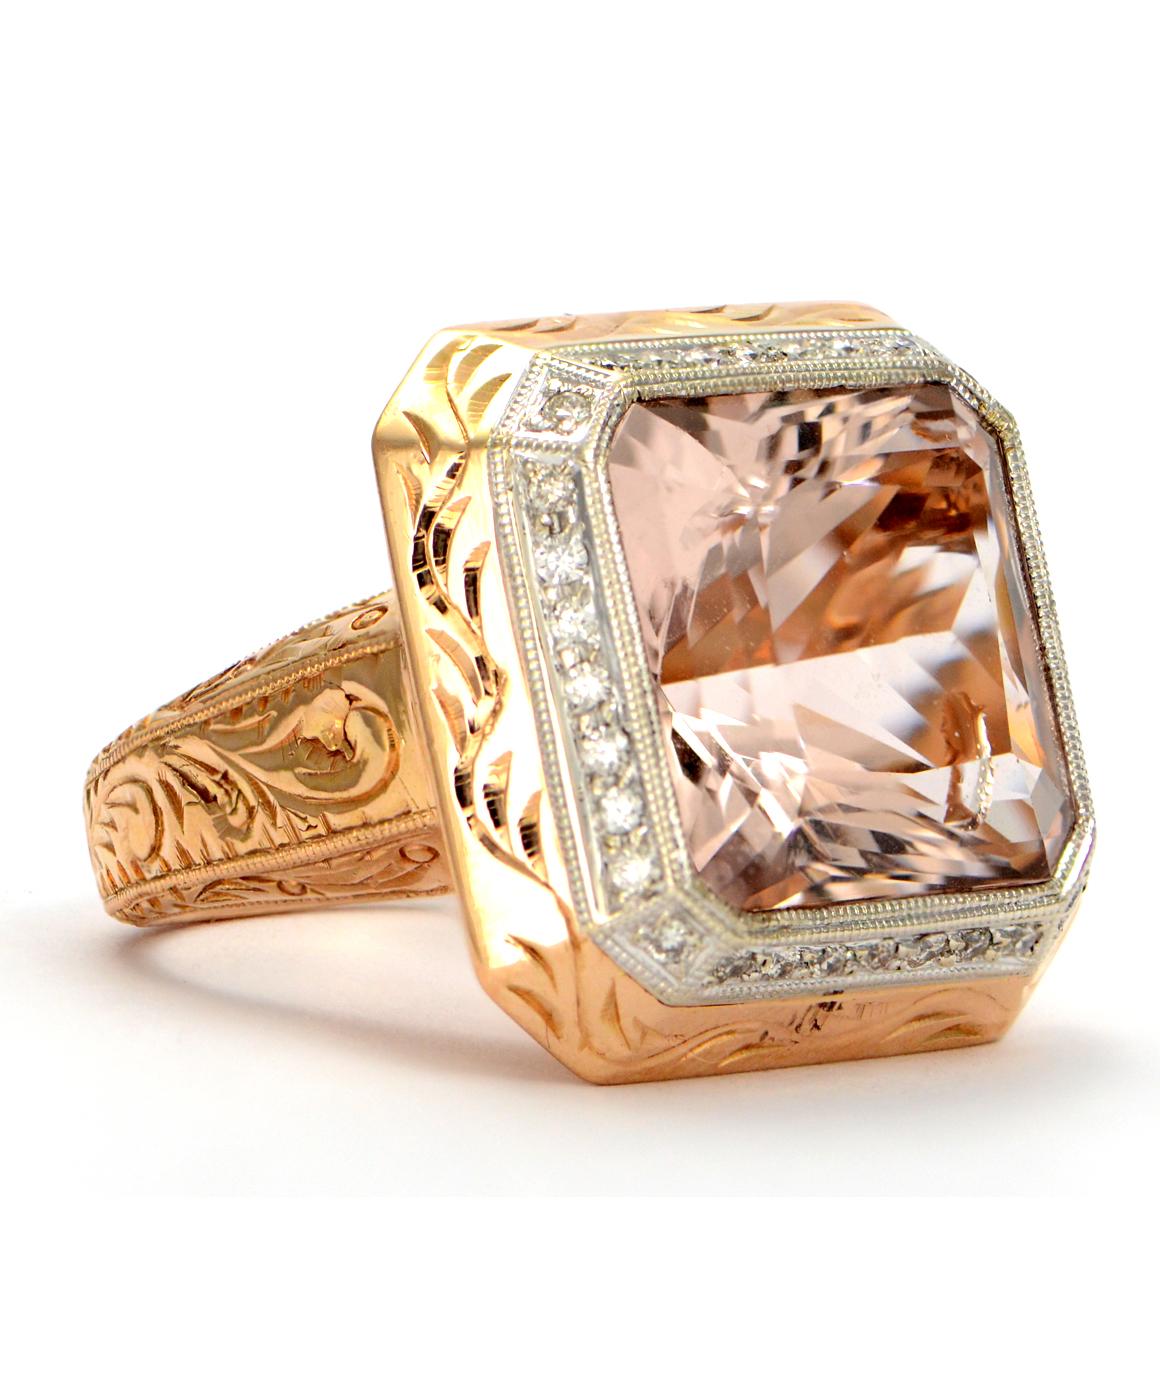 Solid 18K Rose Gold Pink Morganite and Natural Diamond Ring, in excellent condition! This beautiful morganite ring is surrounded by 32 diamonds approximately 0.32CTTW. The ring weighs 17 grams, and is a size 7. The stone measures 14.75mm x 14.75mm